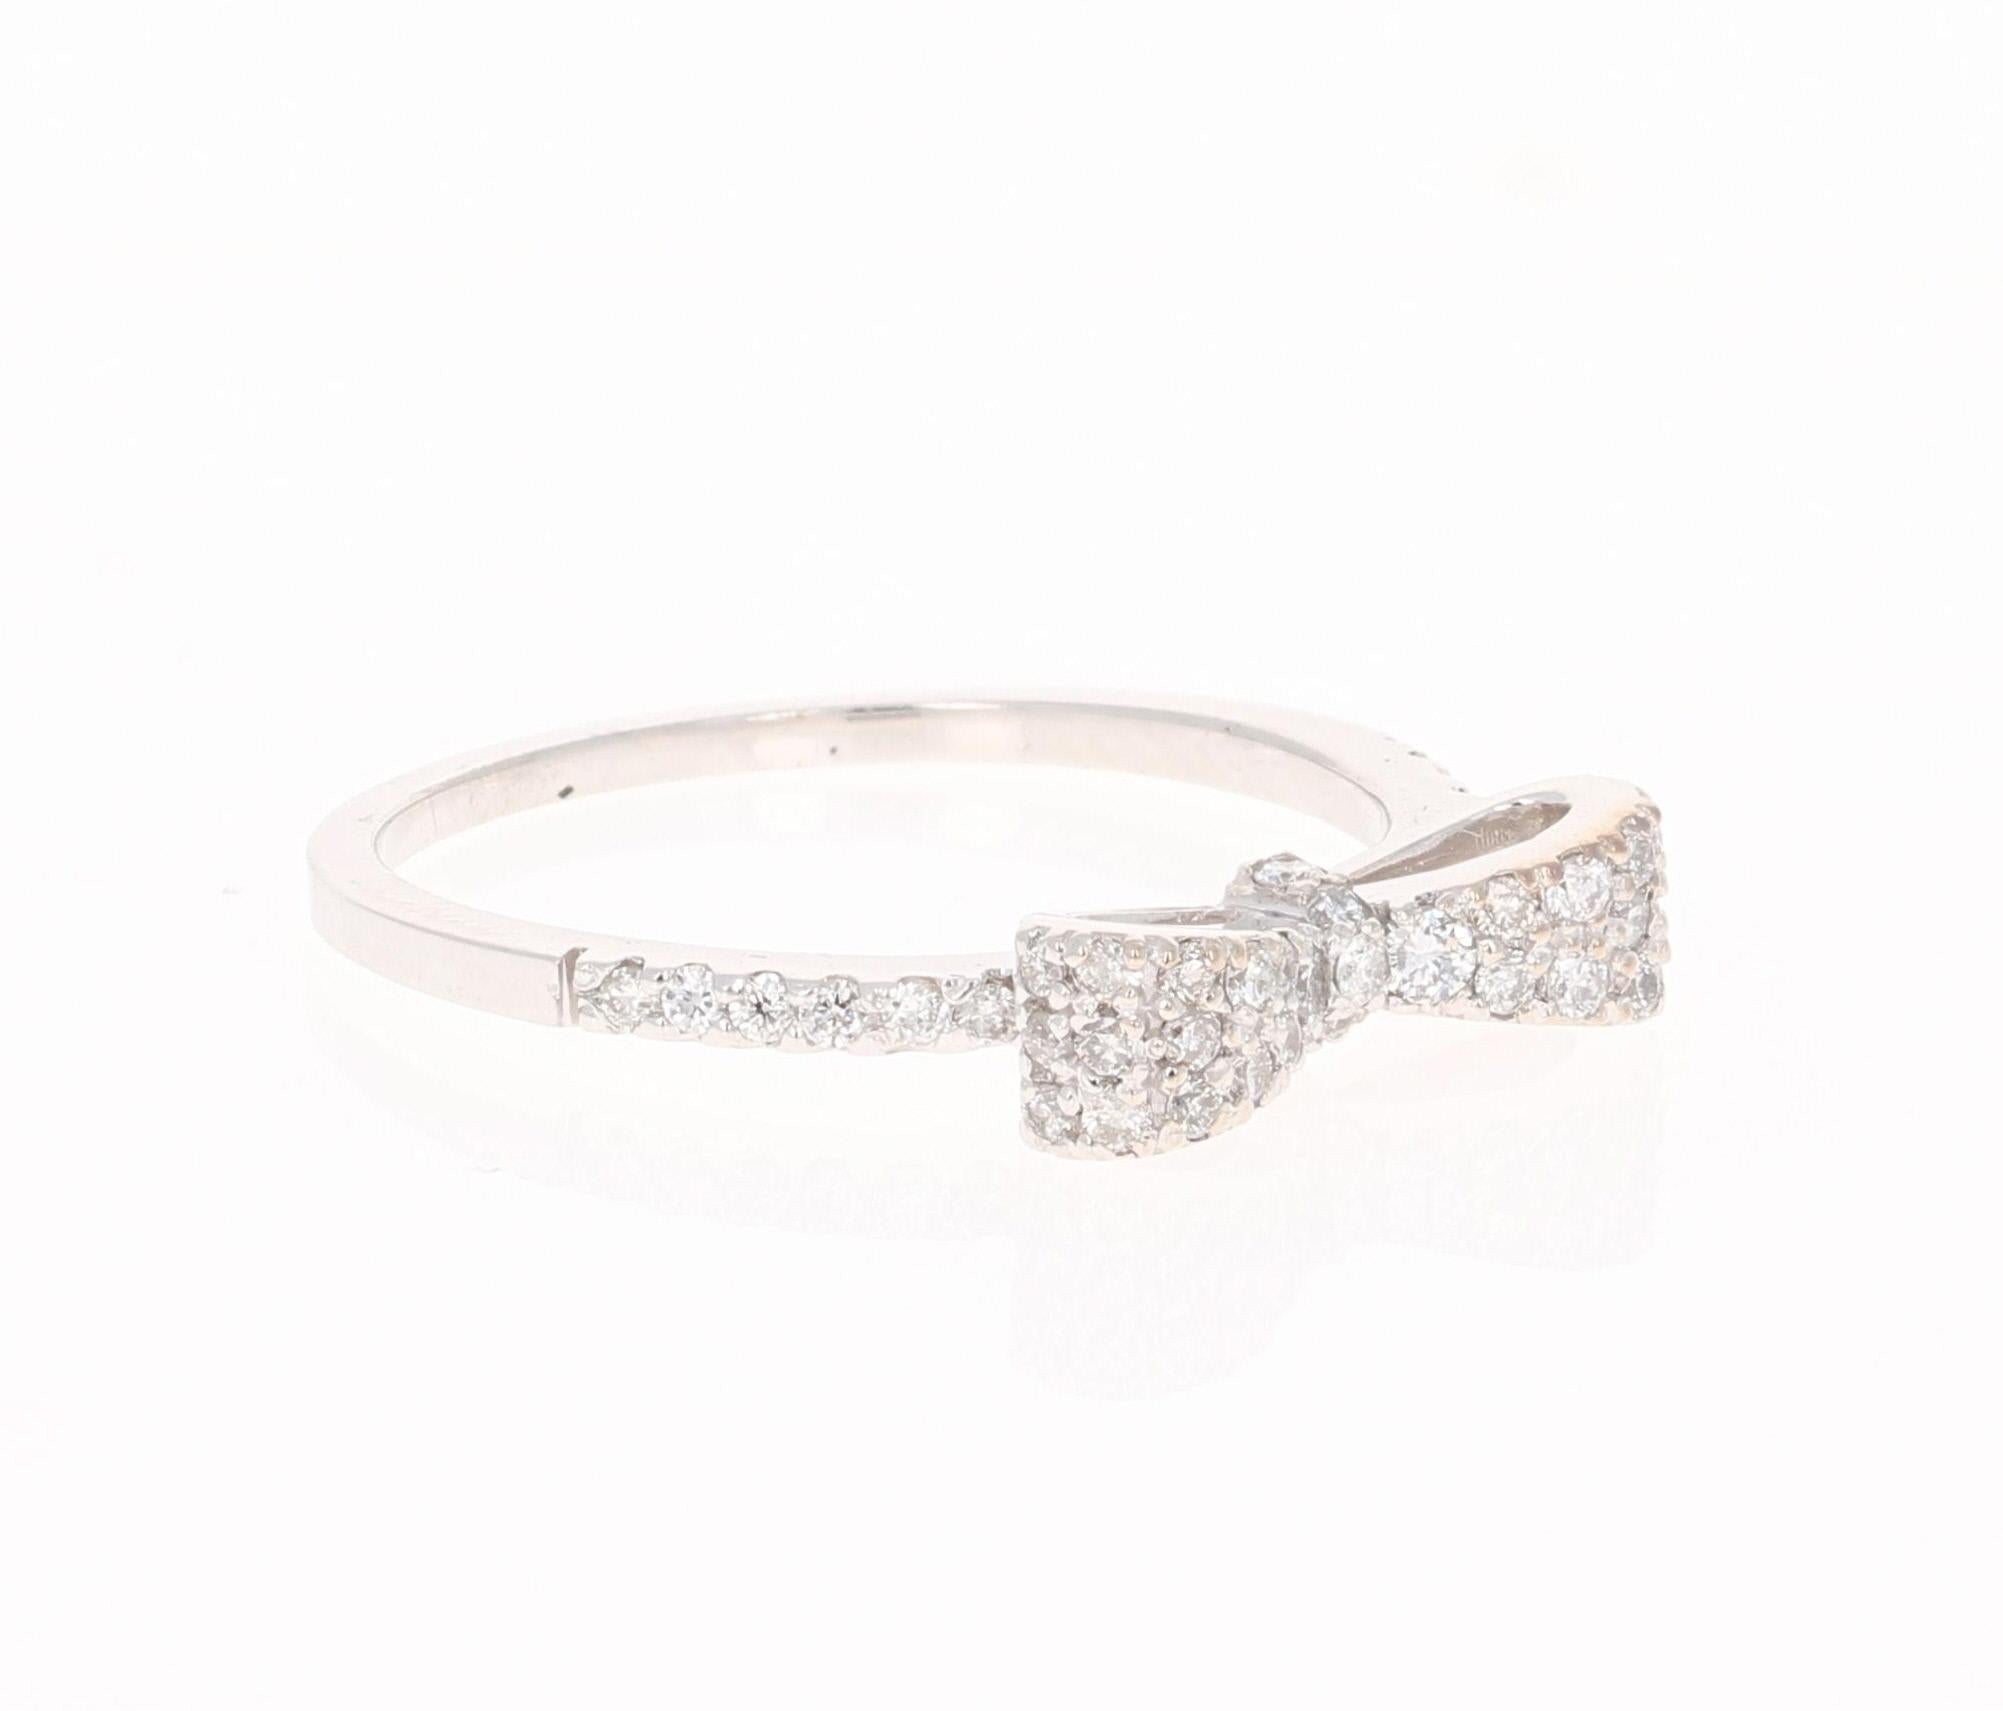 This cute and dainty band has 45 Round Cut Diamonds that weigh 0.40 Carats. The clarity and color of the diamonds are VS-H.

Crafted in 14 Karat White Gold and is approximately 2.4 grams 

The ring is a size 6 1/2 and can be re-sized at no